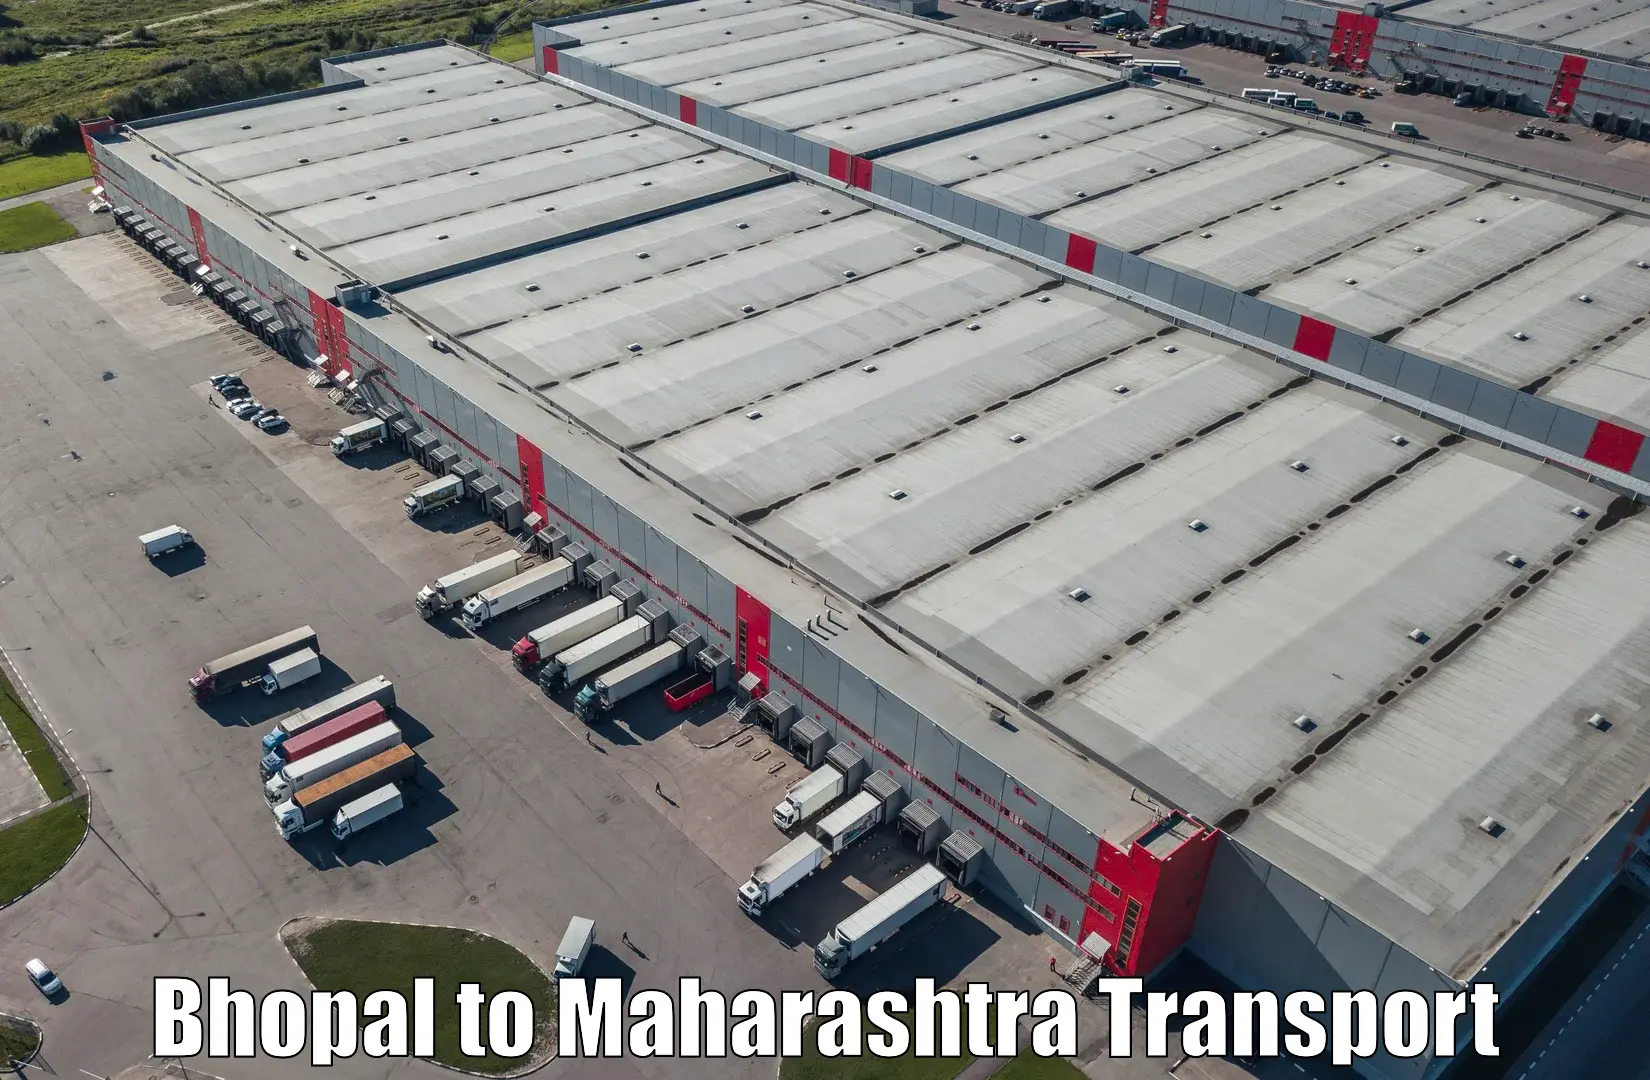 Cargo train transport services Bhopal to Chalisgaon